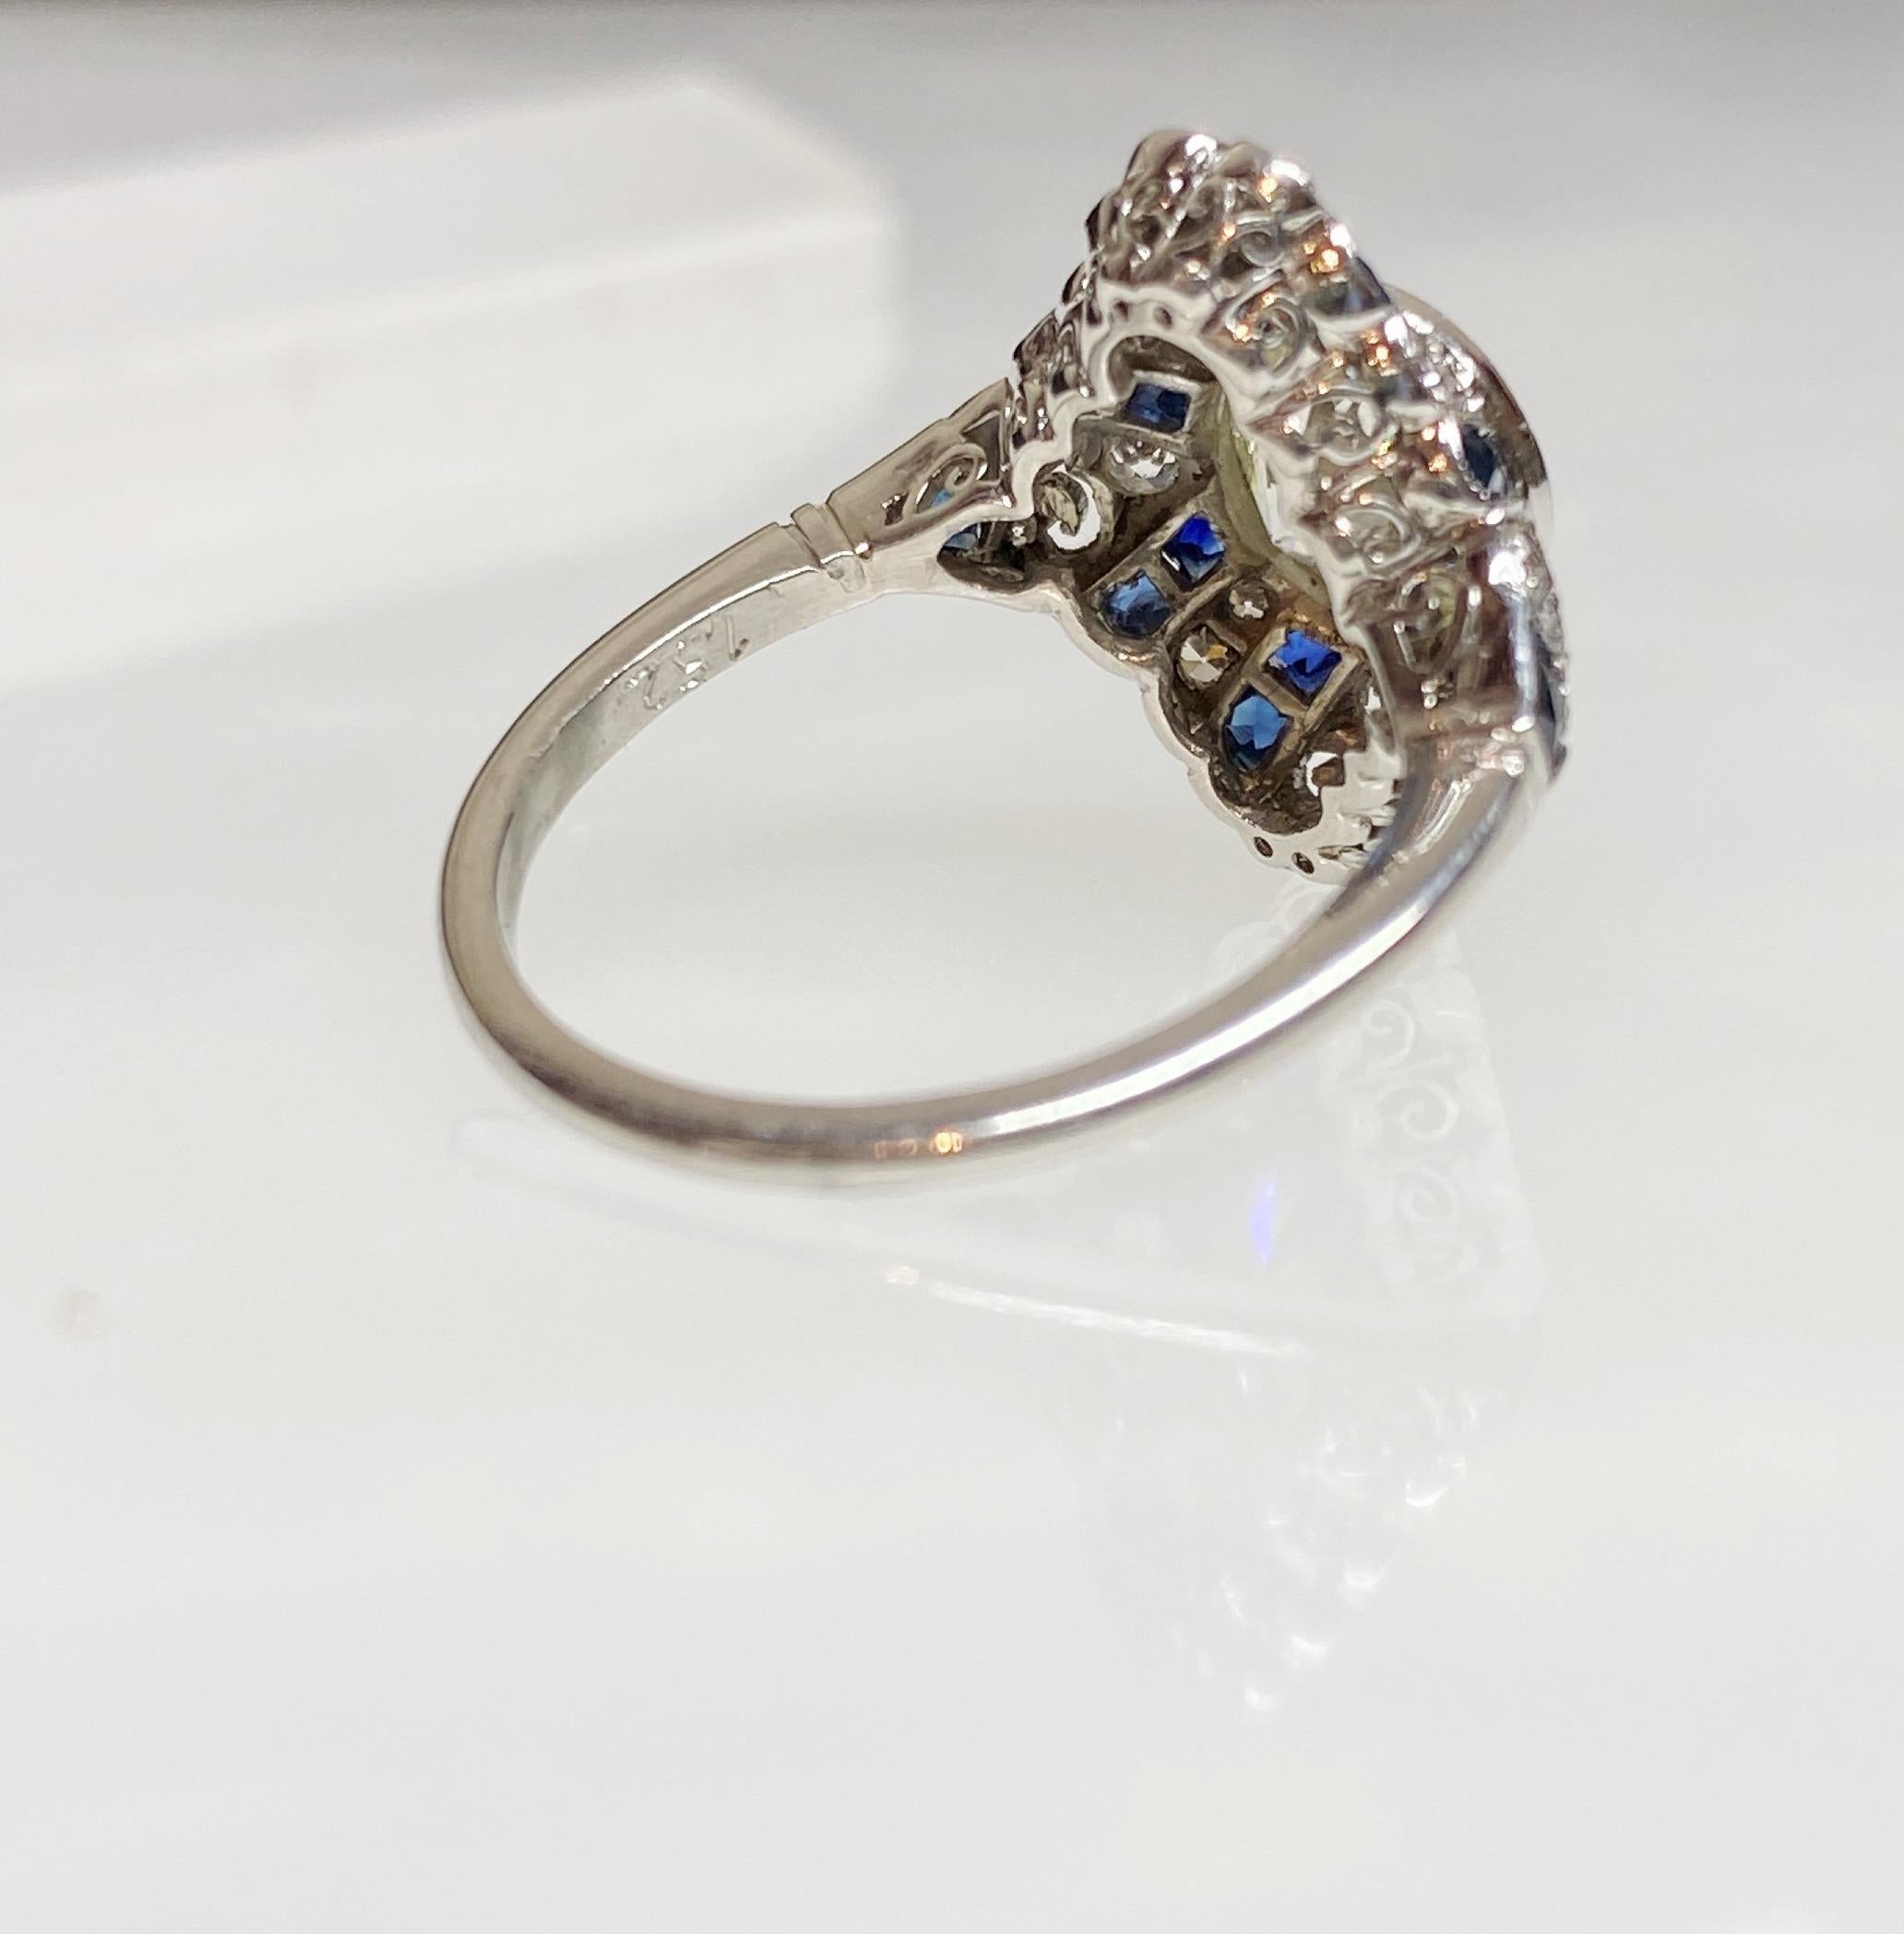 1.52 Carat Old European Cut Diamond and Sapphire Art Deco Inspired Ring For Sale 5